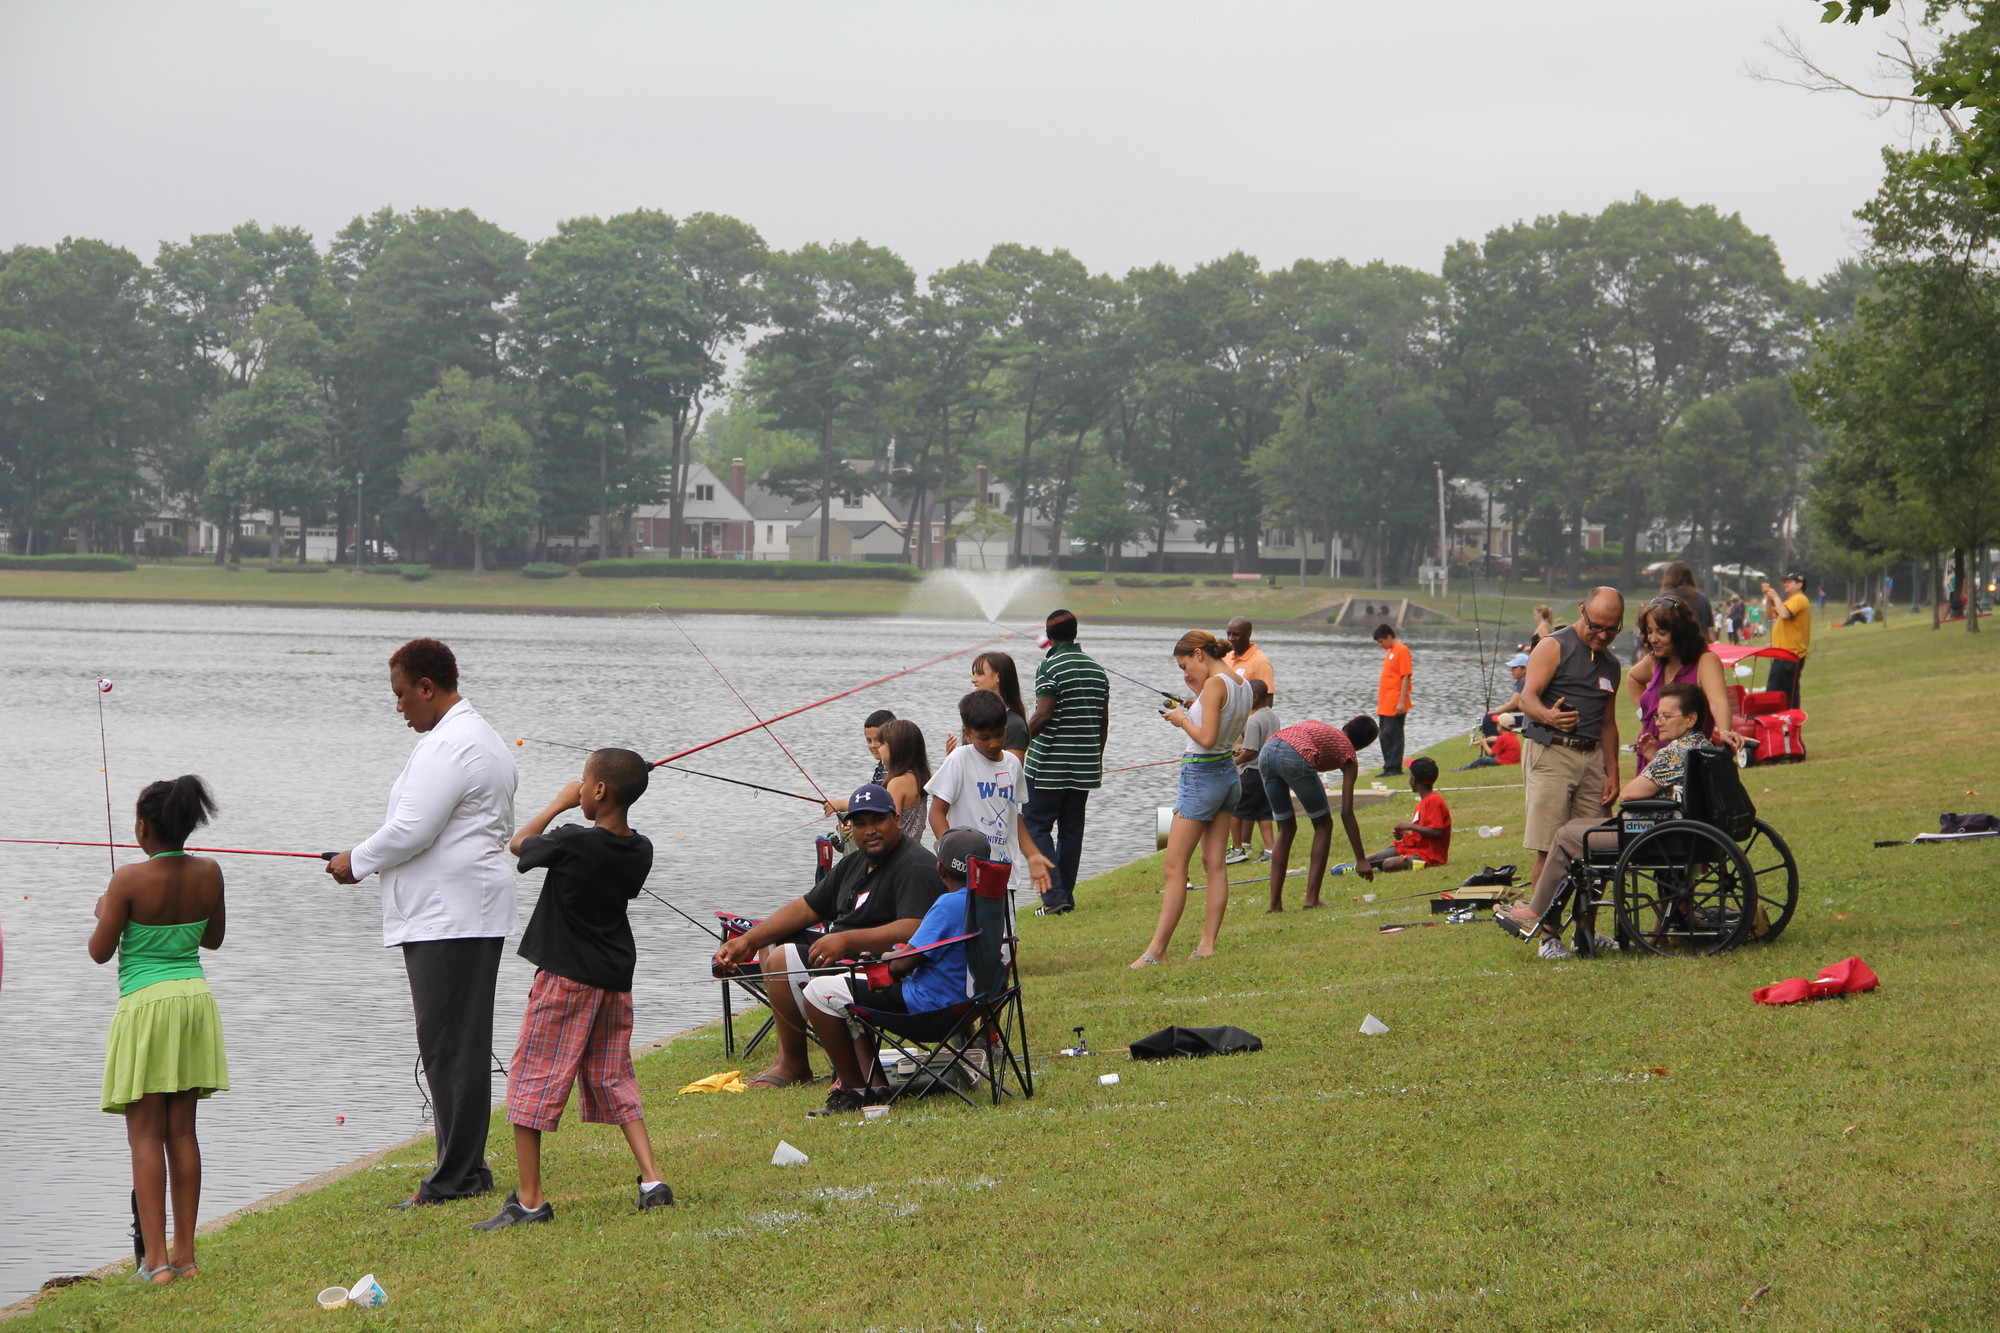 Residents lined the perimeter of the Hendrickson Park lake waiting to catch the big one in the first Family Fishing Weekend hosted by the village and the DEC.